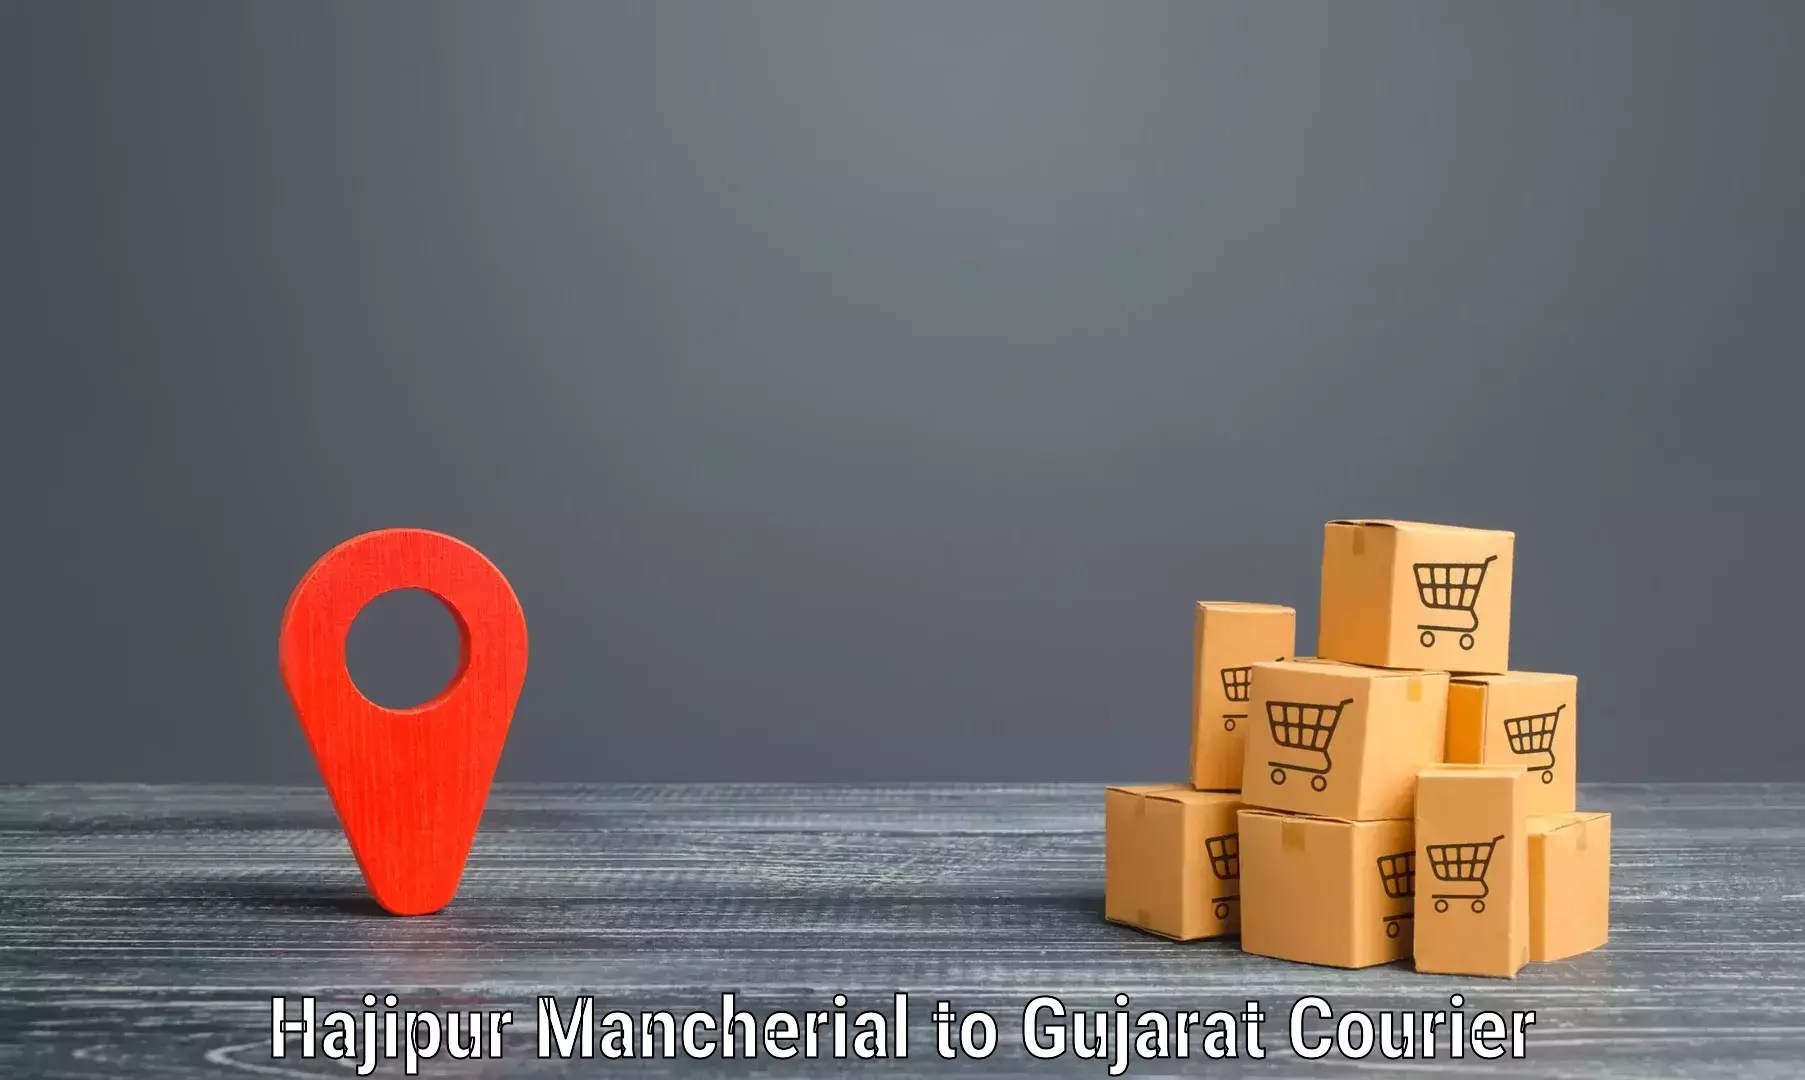 Courier service booking Hajipur Mancherial to Kachchh